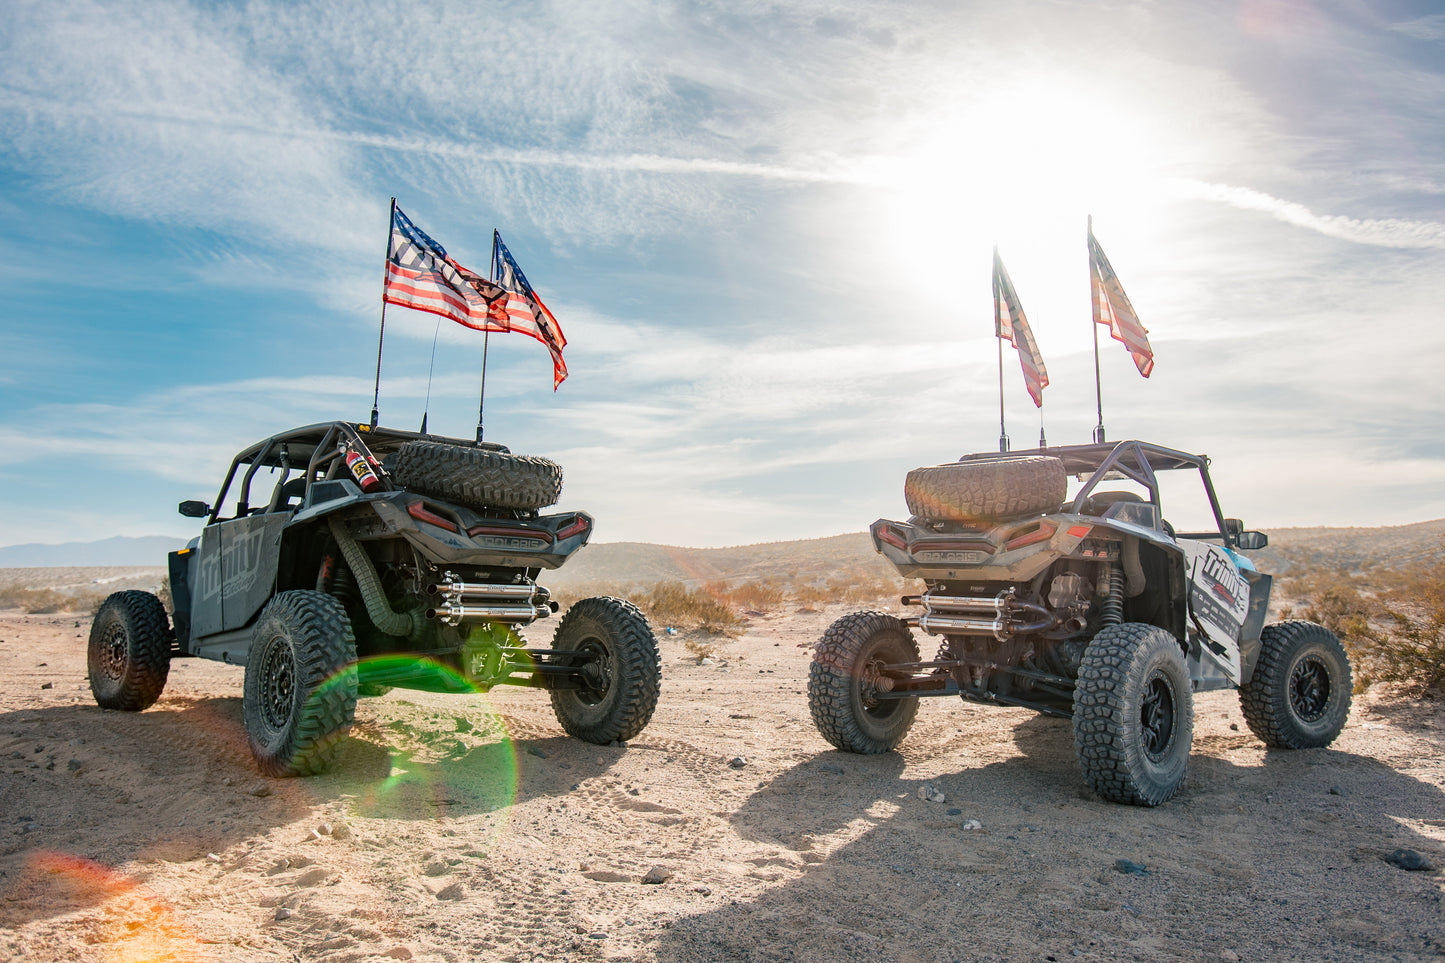 Trinity Racing Stainless Steel RZR TURBO S SLIP ON on two machines in desert